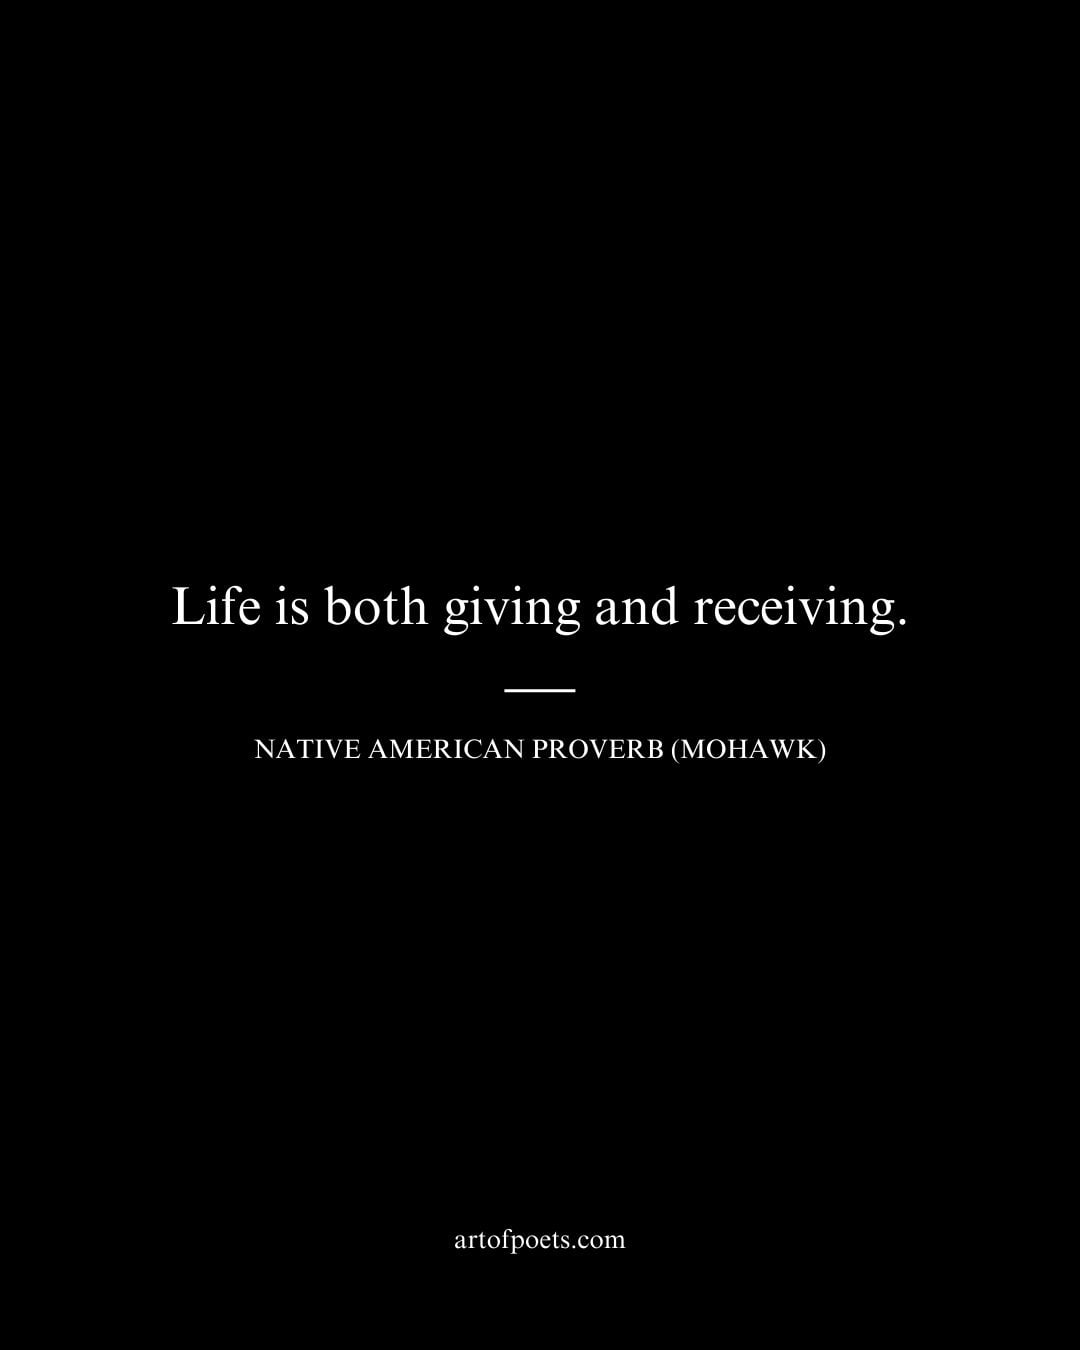 Life is both giving and receiving